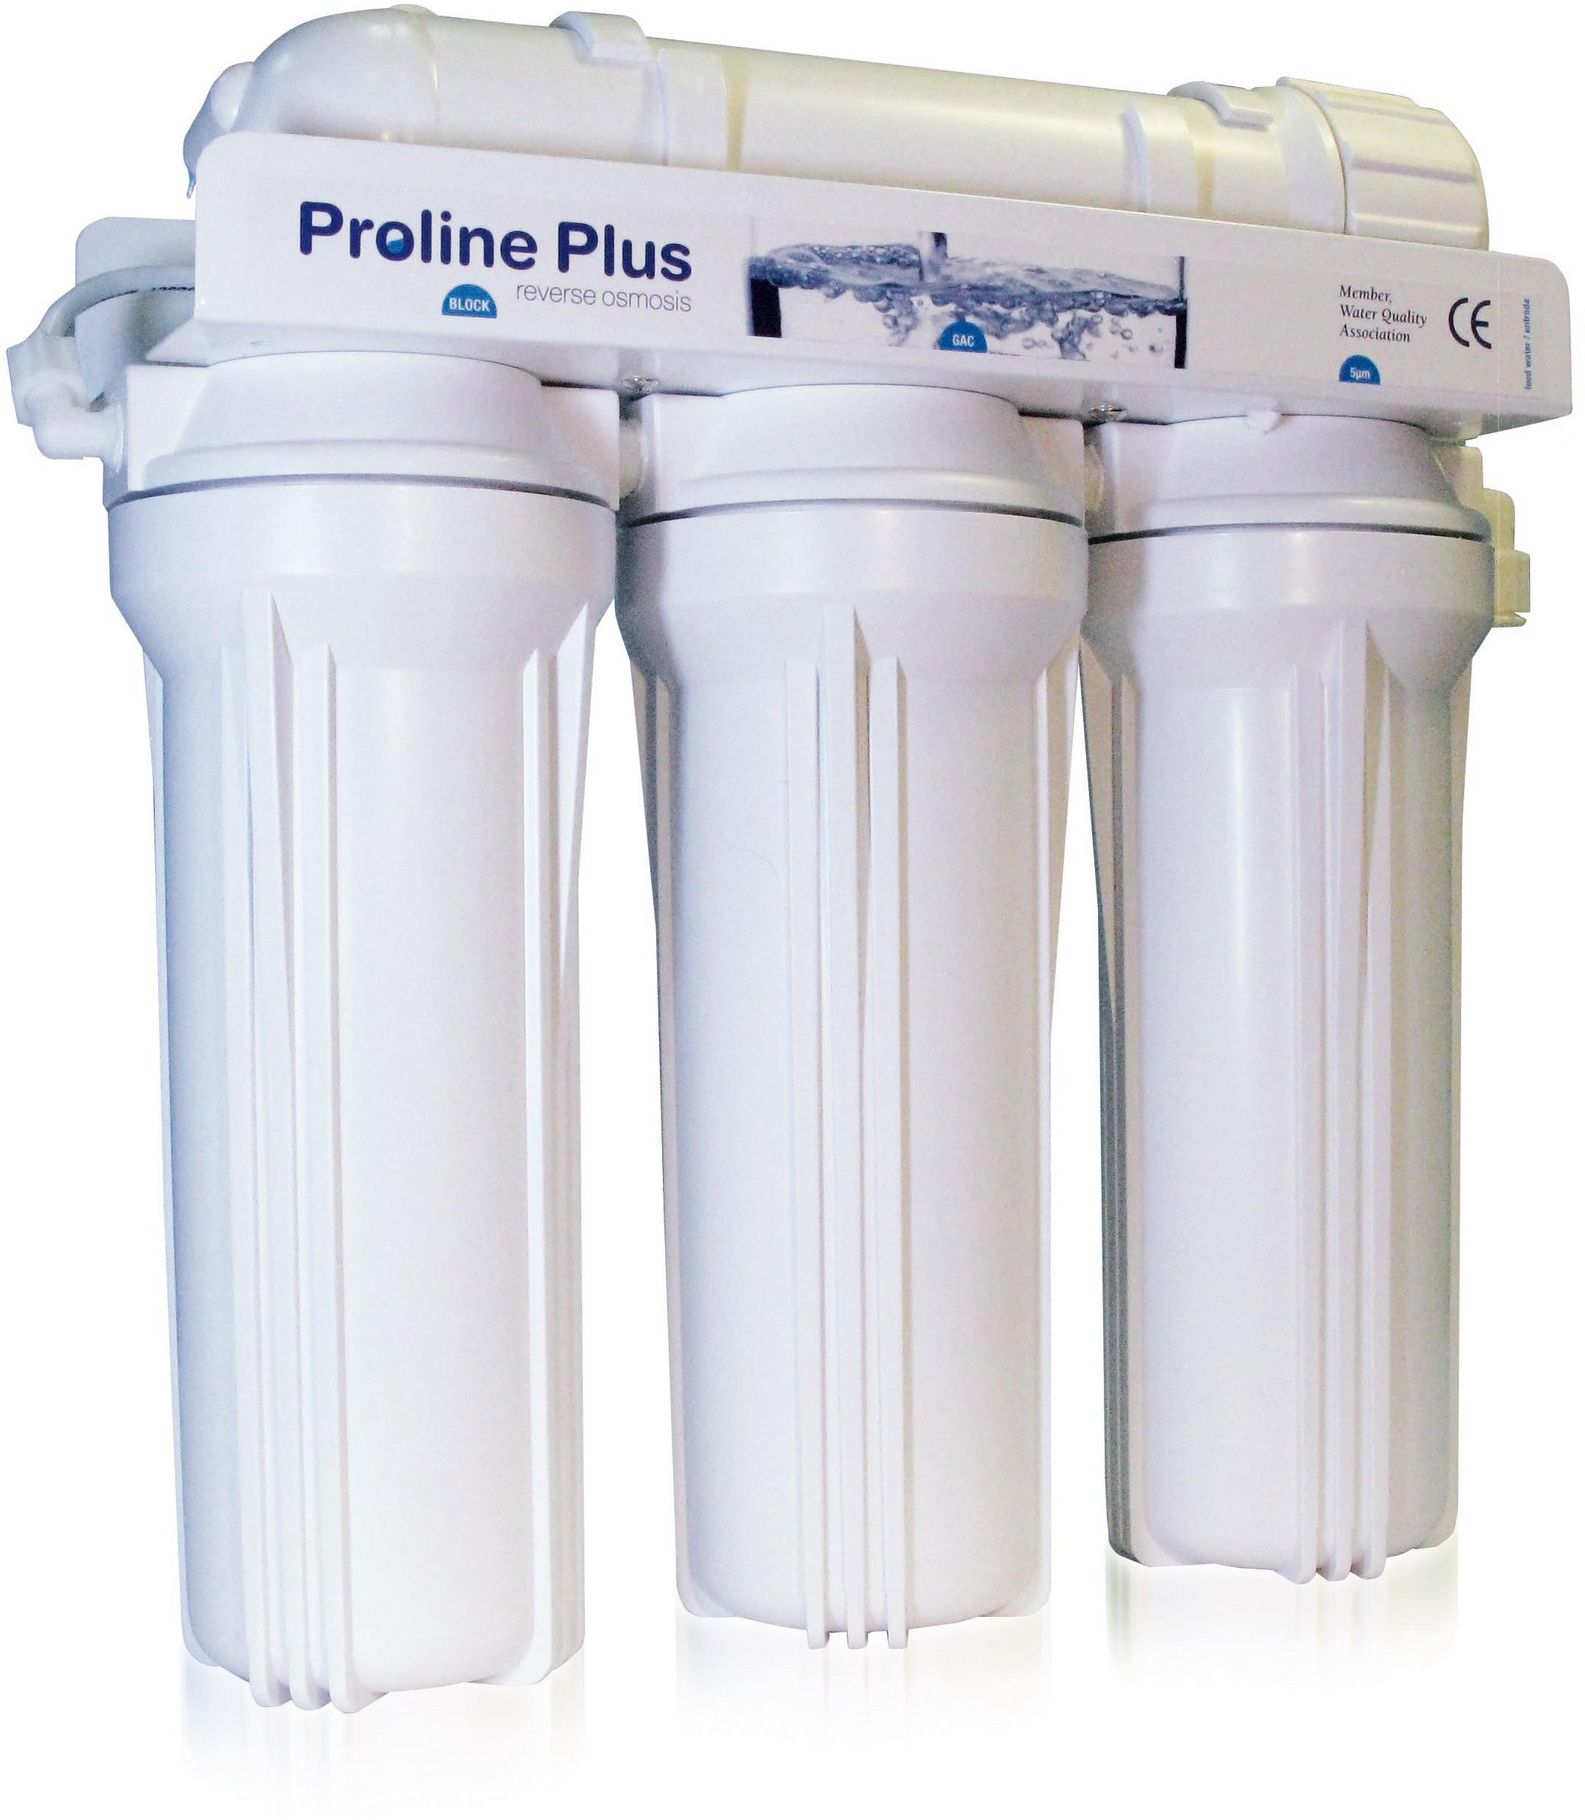 Ranking the best water softeners in 2022